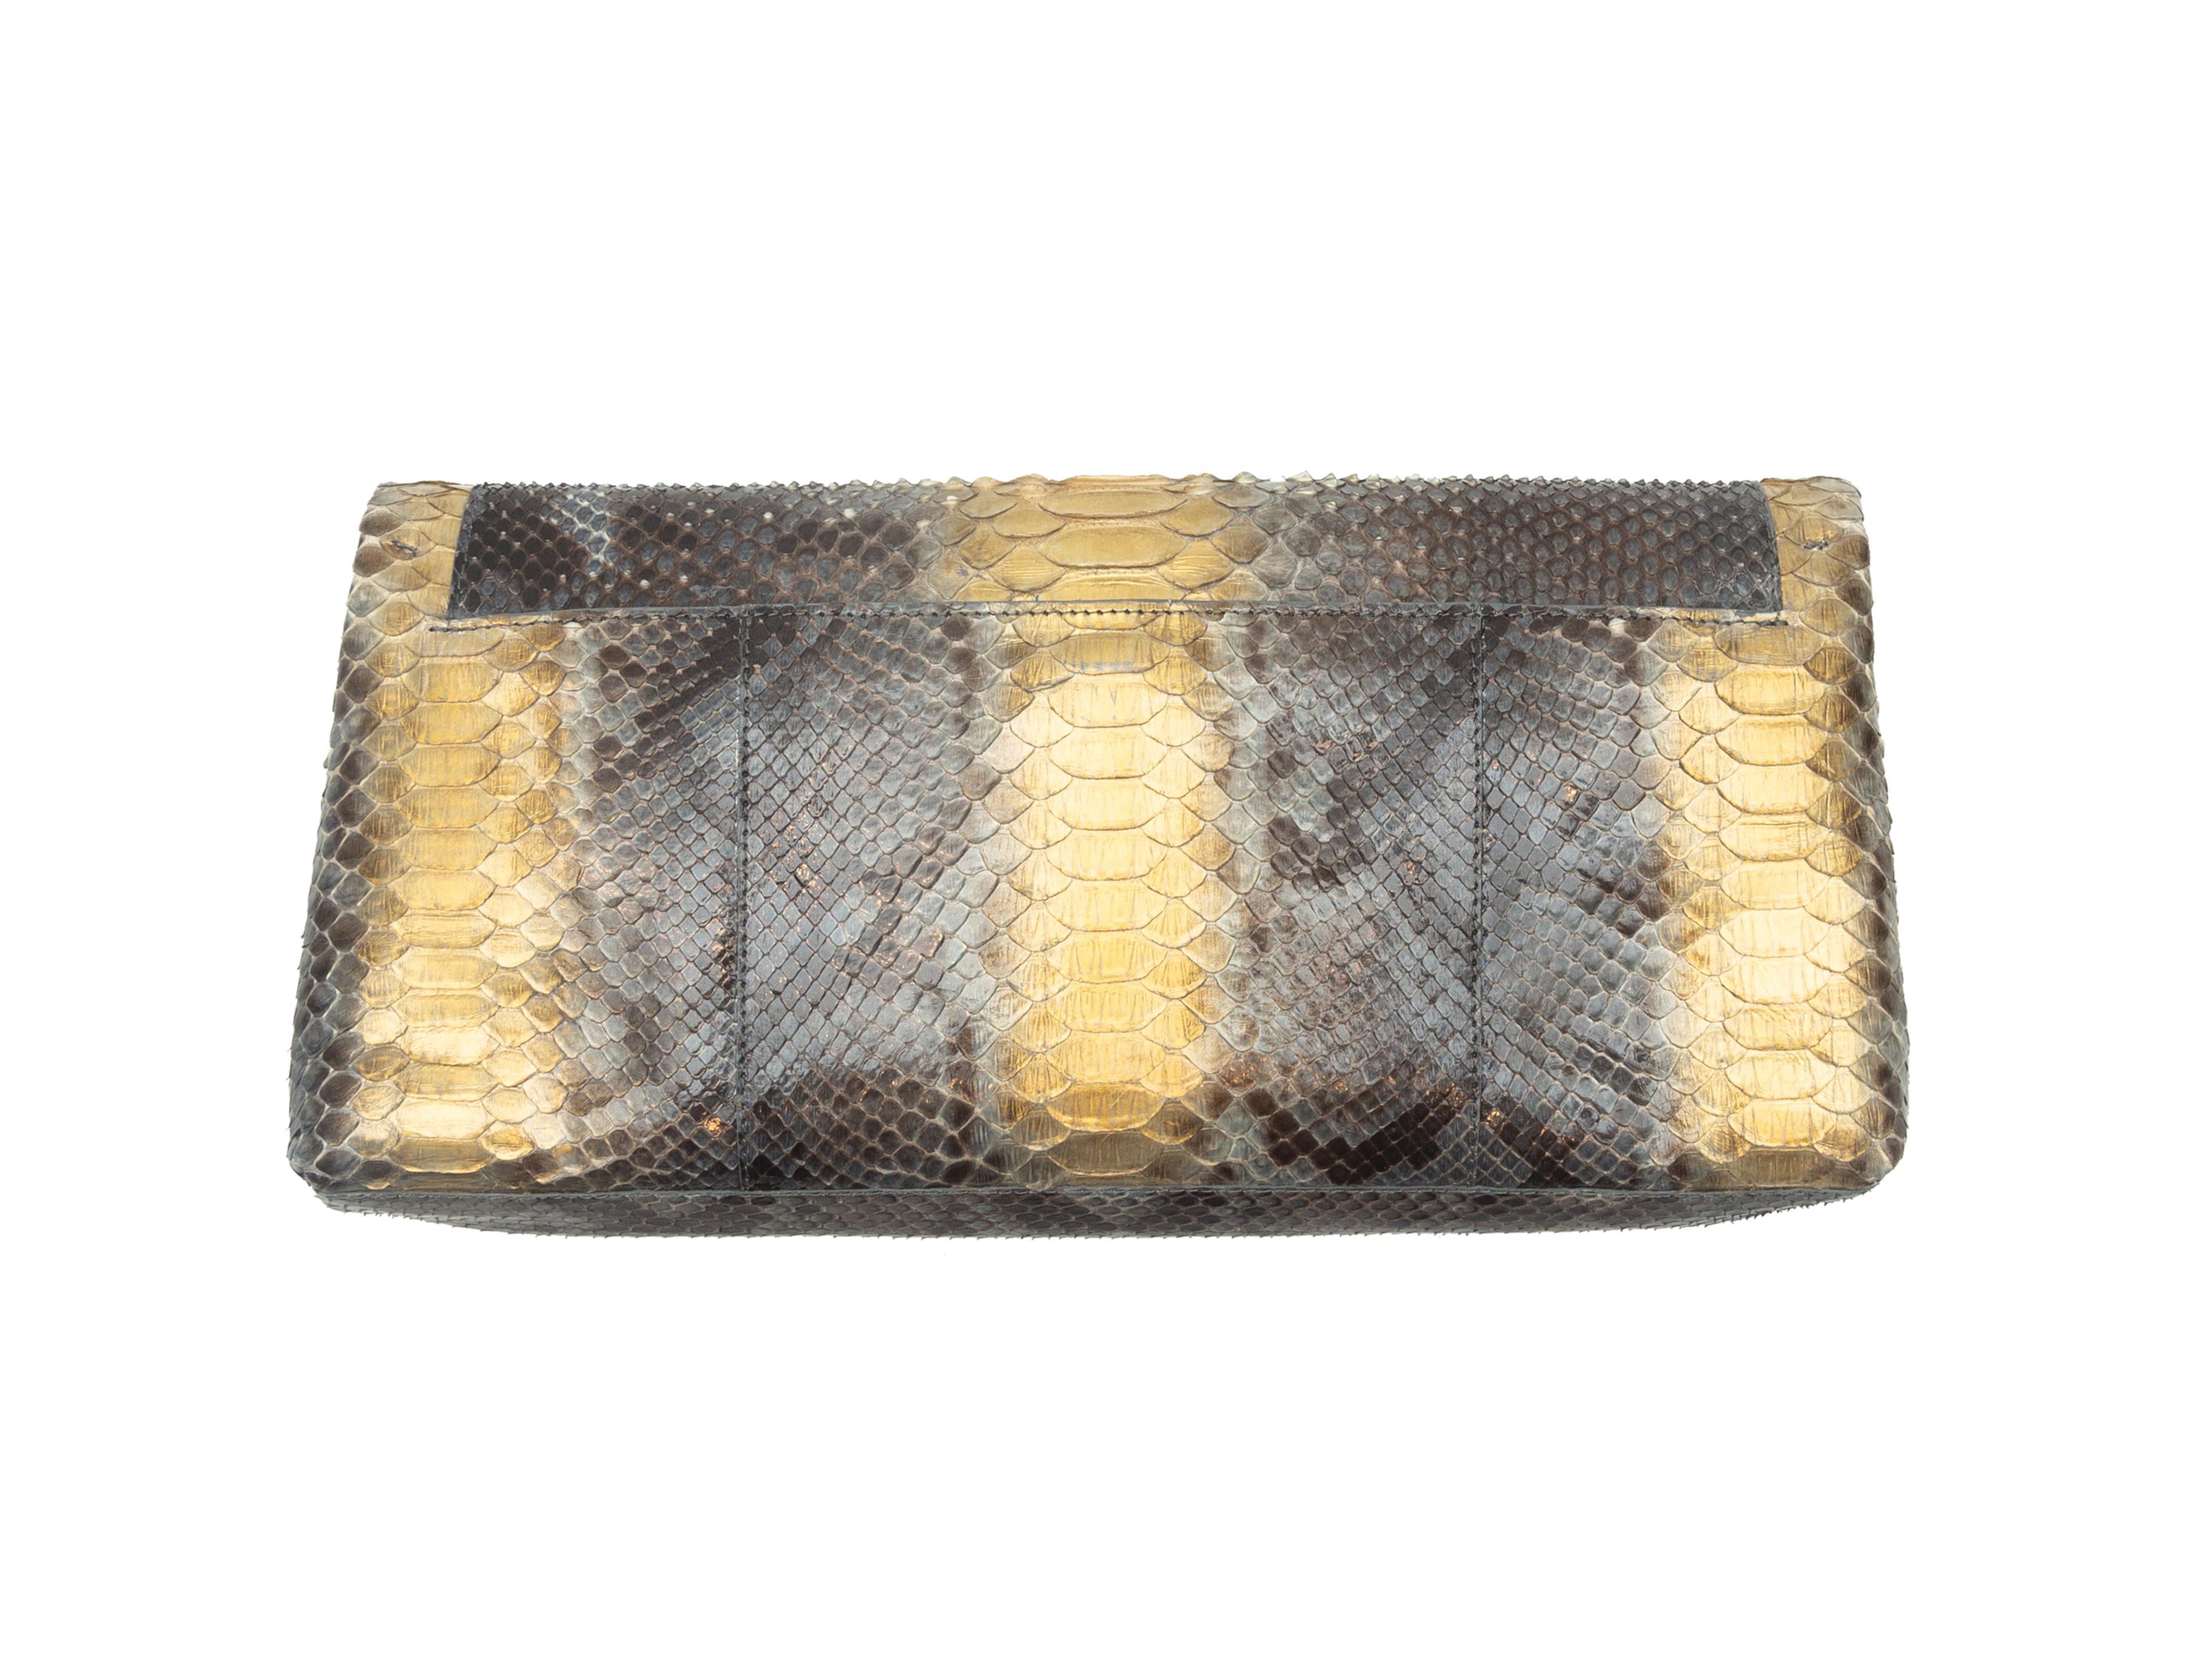 Product details: Brown and metallic gold python clutch by Nancy Gonzalez. Interior zip pocket. Flap closure at front. 11